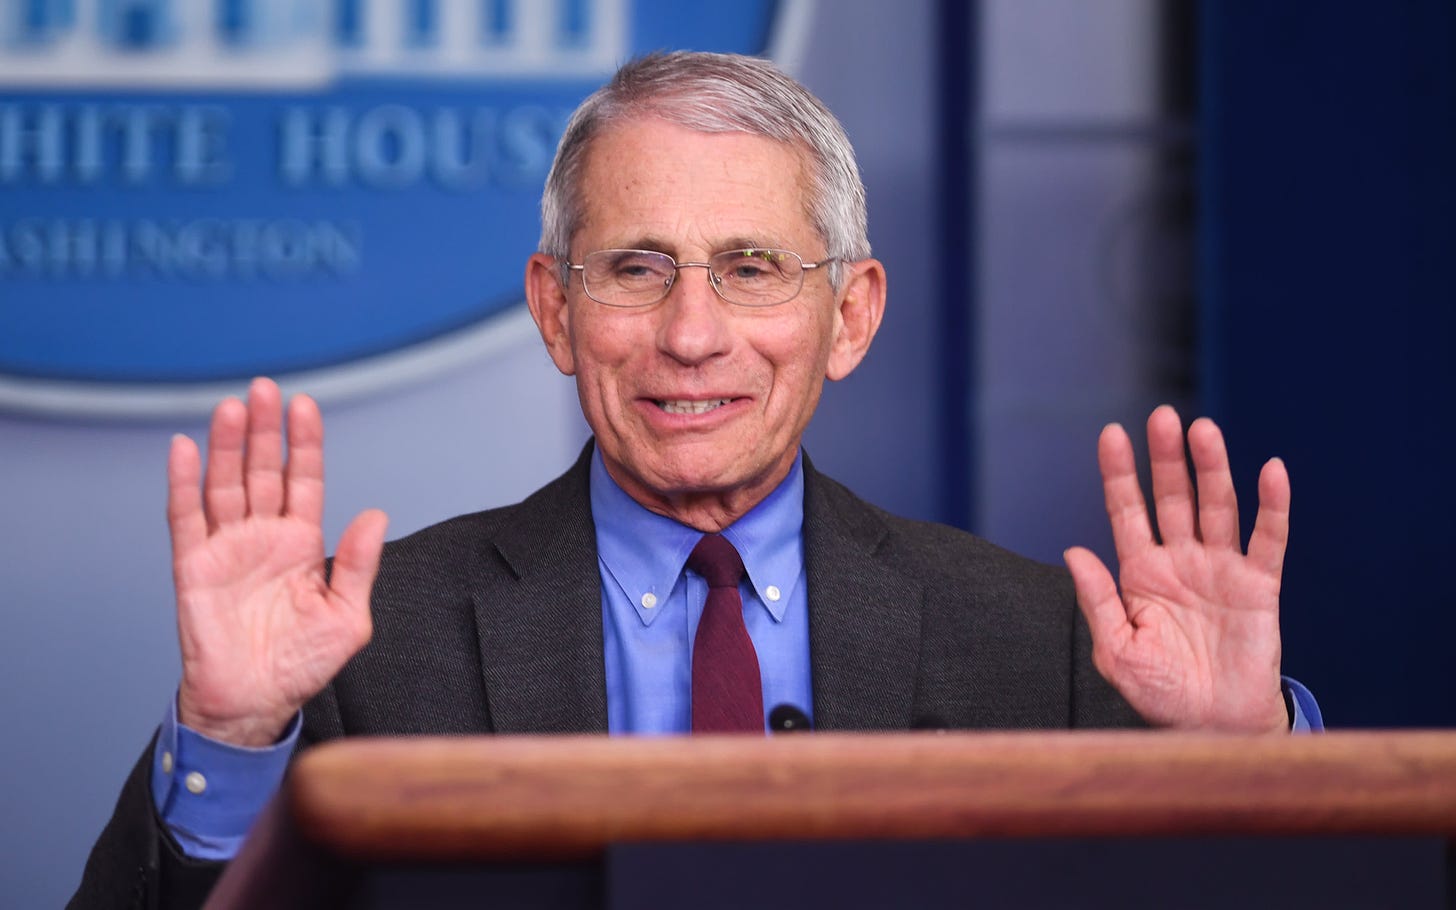 White House advisor Anthony Fauci on keeping up with Covid-19 news